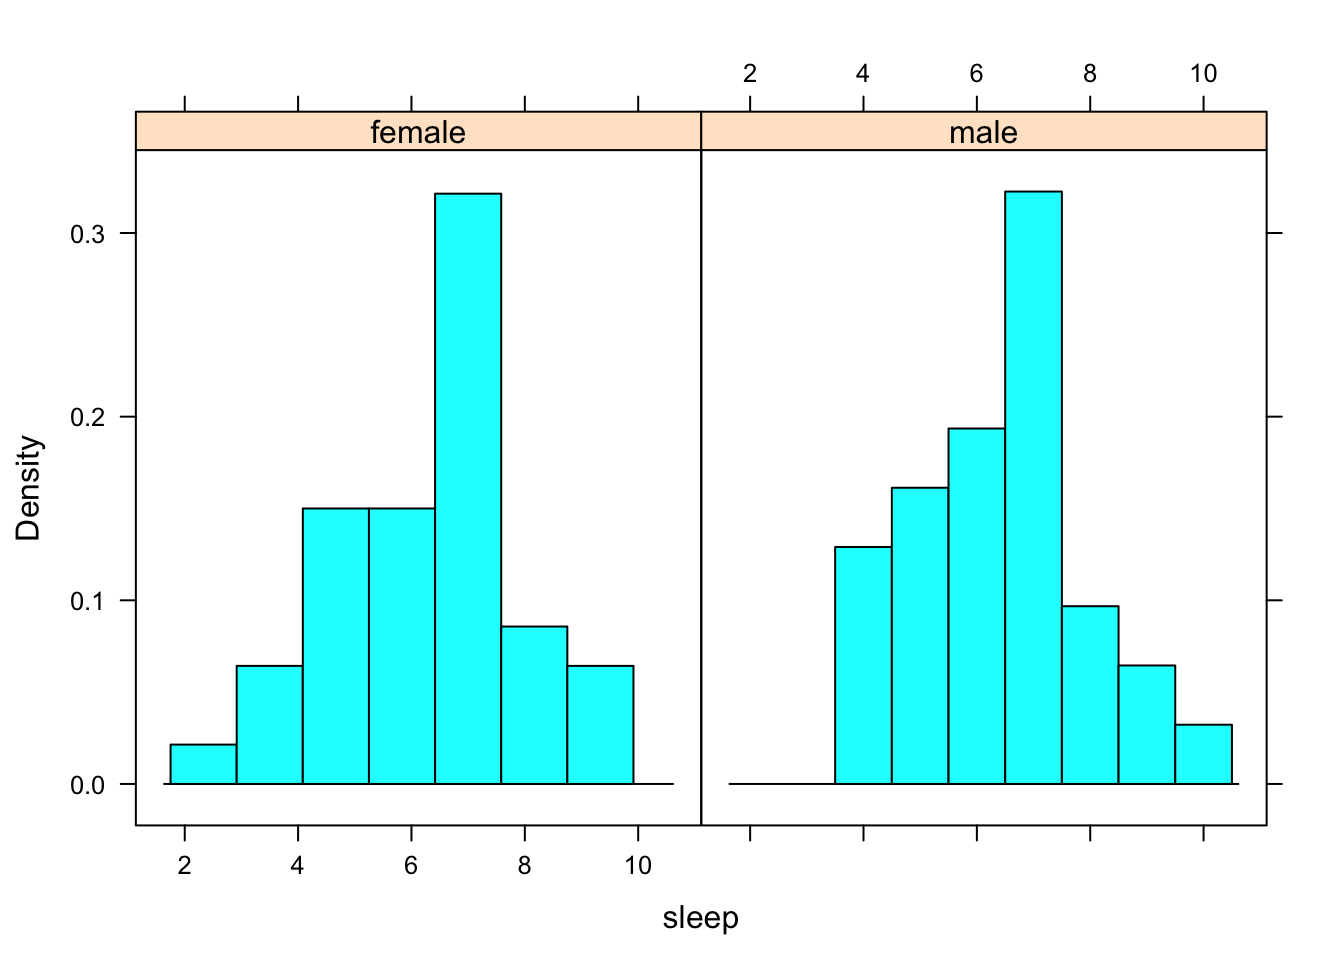 Sleep Histograms:  The histogram on the left shows the hours of sleep that females in the sample get.  The histogram on the right shows the hours of sleep that males in the sample get.